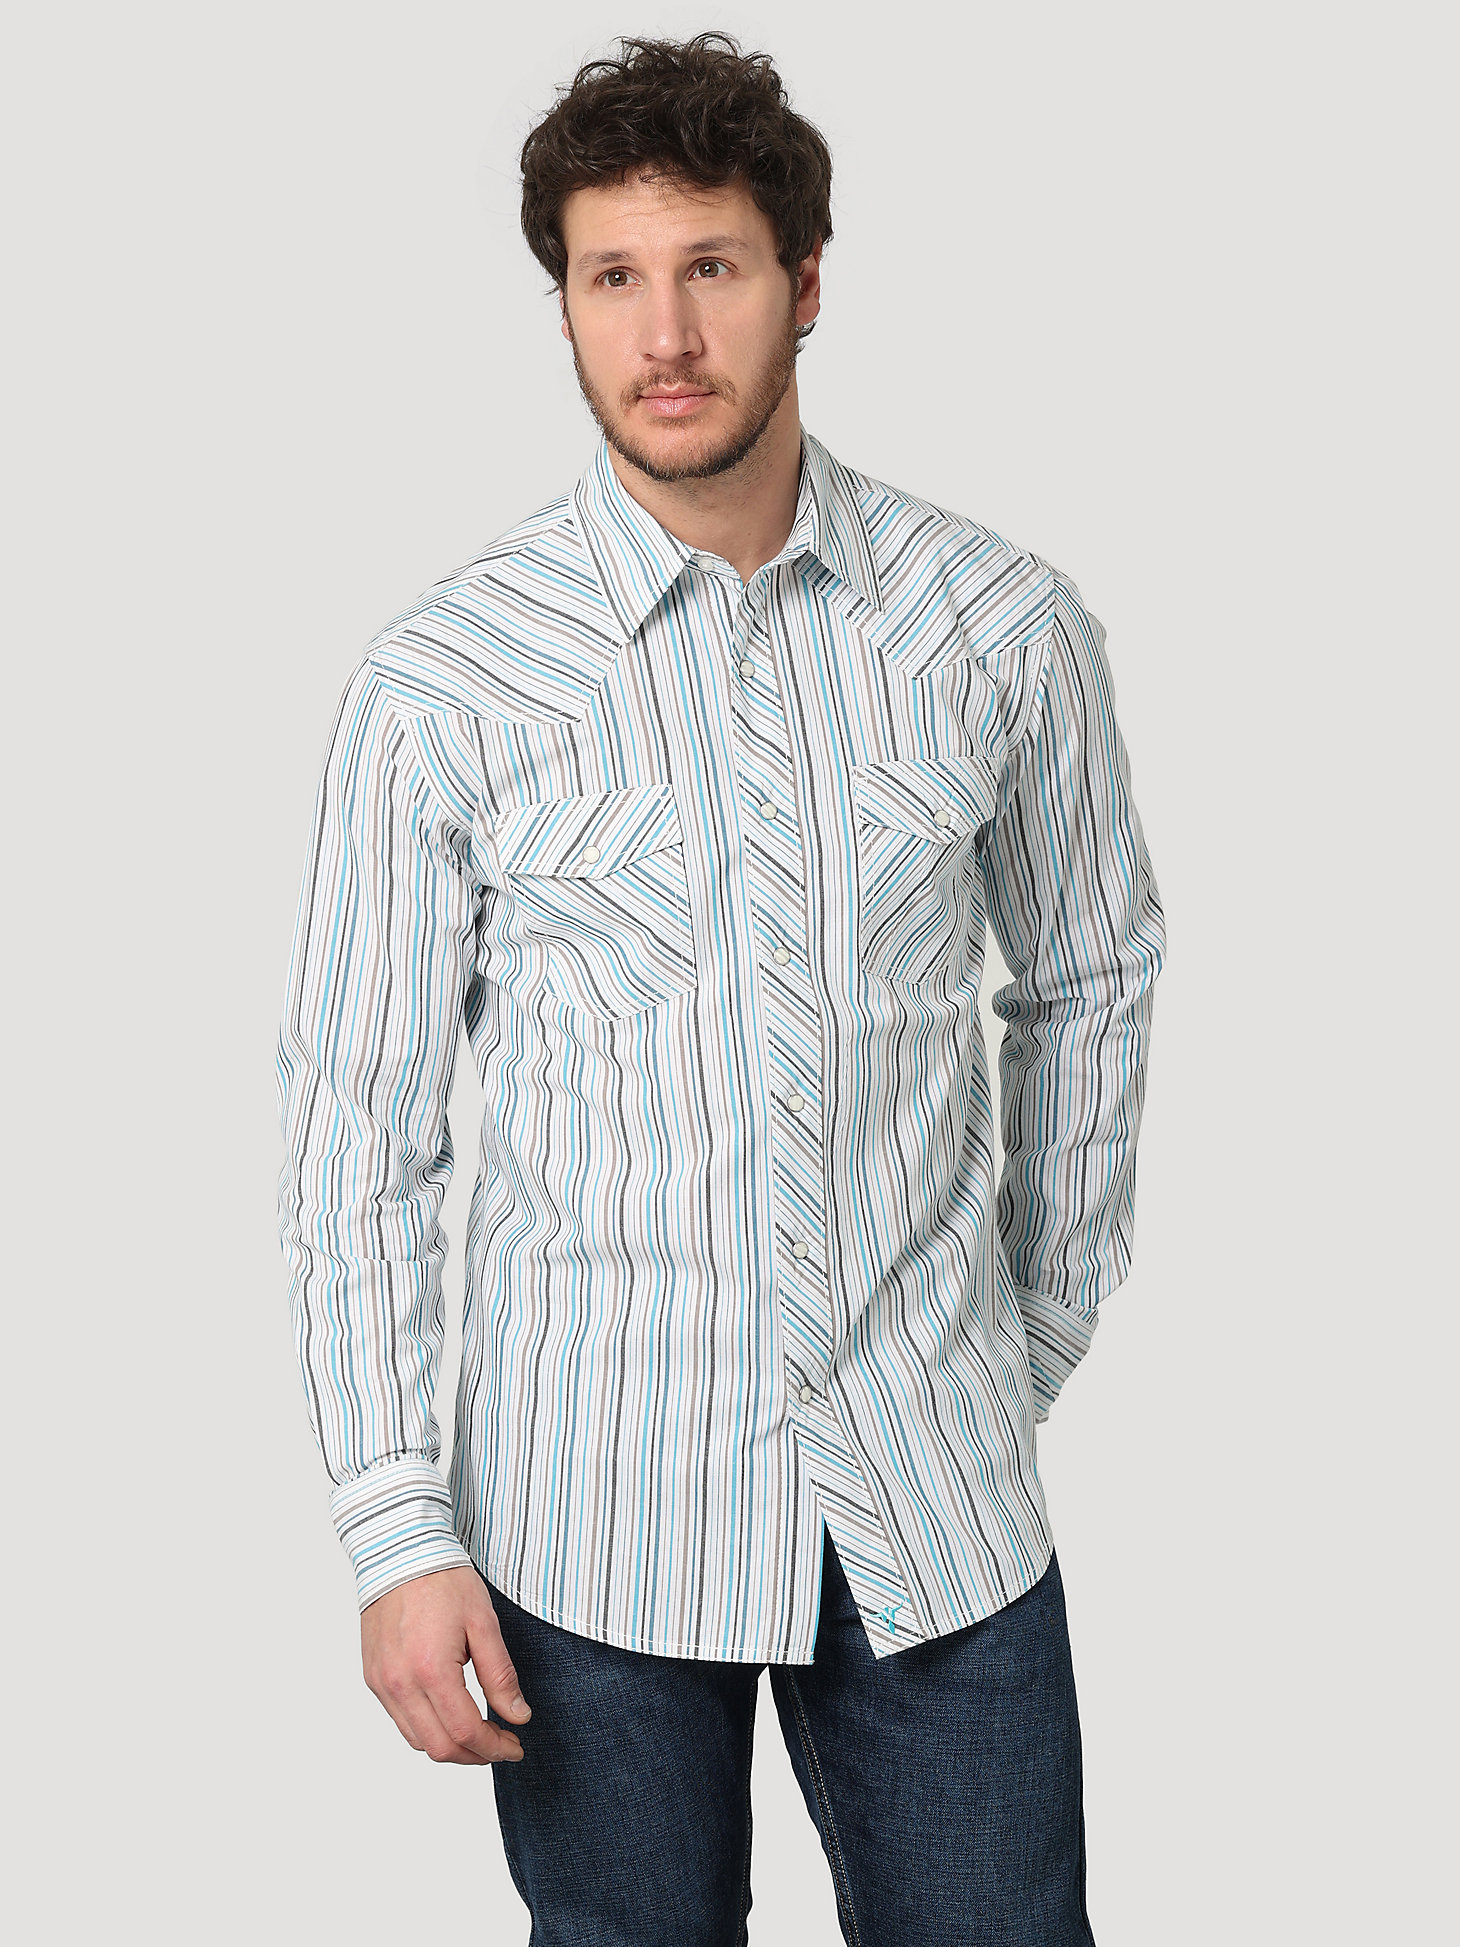 Men's Wrangler® 20X® Competition Advanced Comfort Long Sleeve Two Pocket Western Snap Stripe Shirt in Turquoise/Brown Strip main view